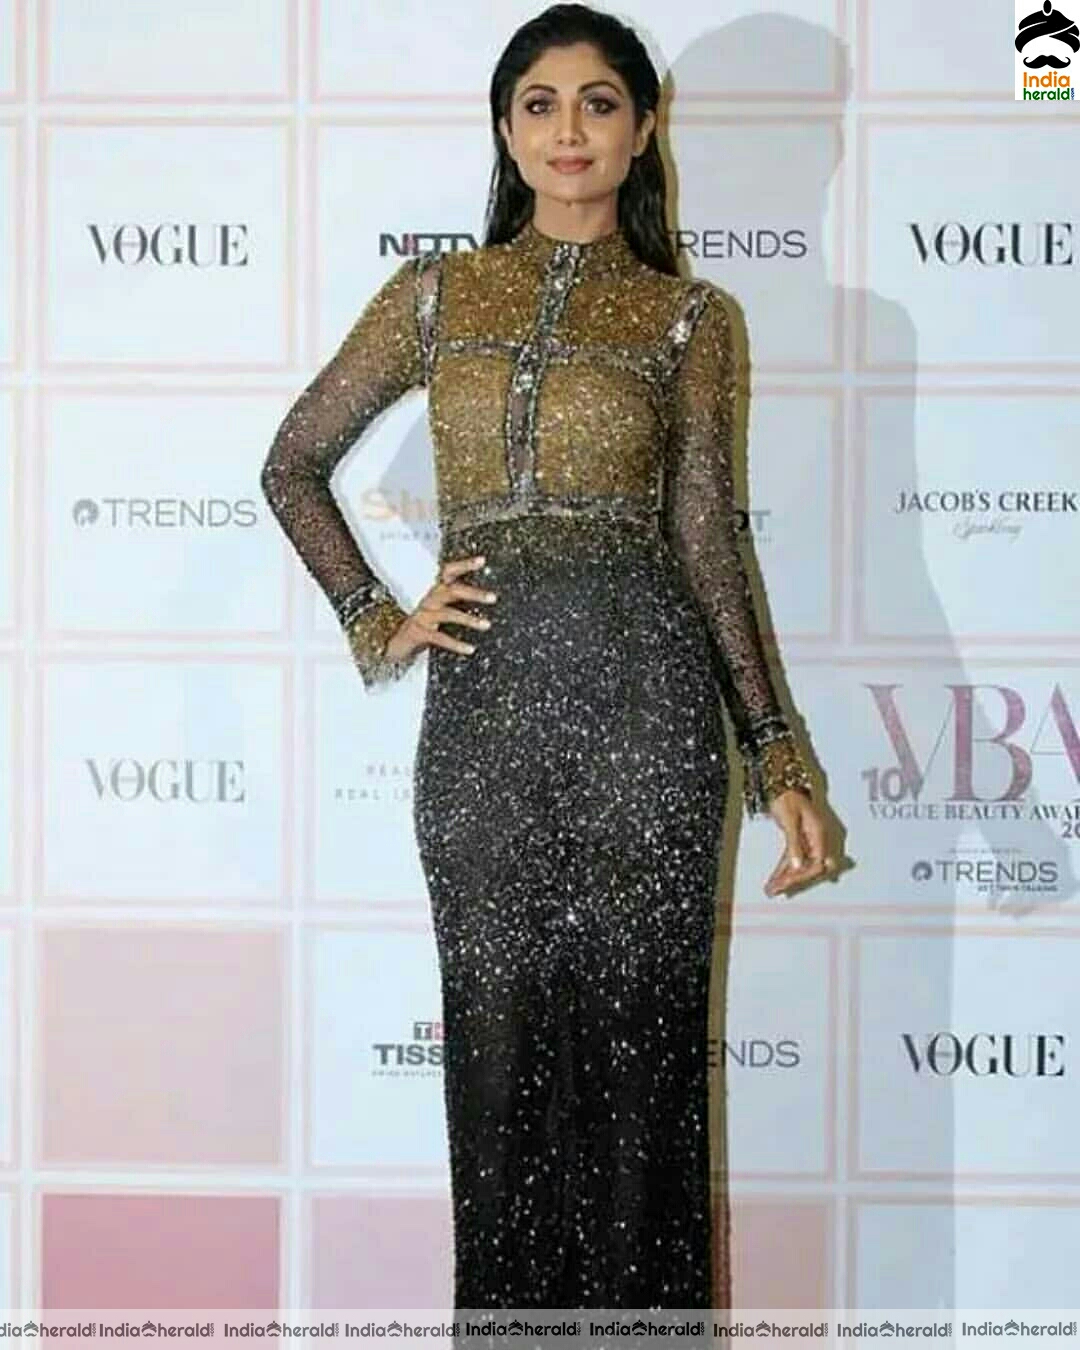 Shilpa Shetty Shines In A Golden Black Gown At Vogue Beauty Awards 2019